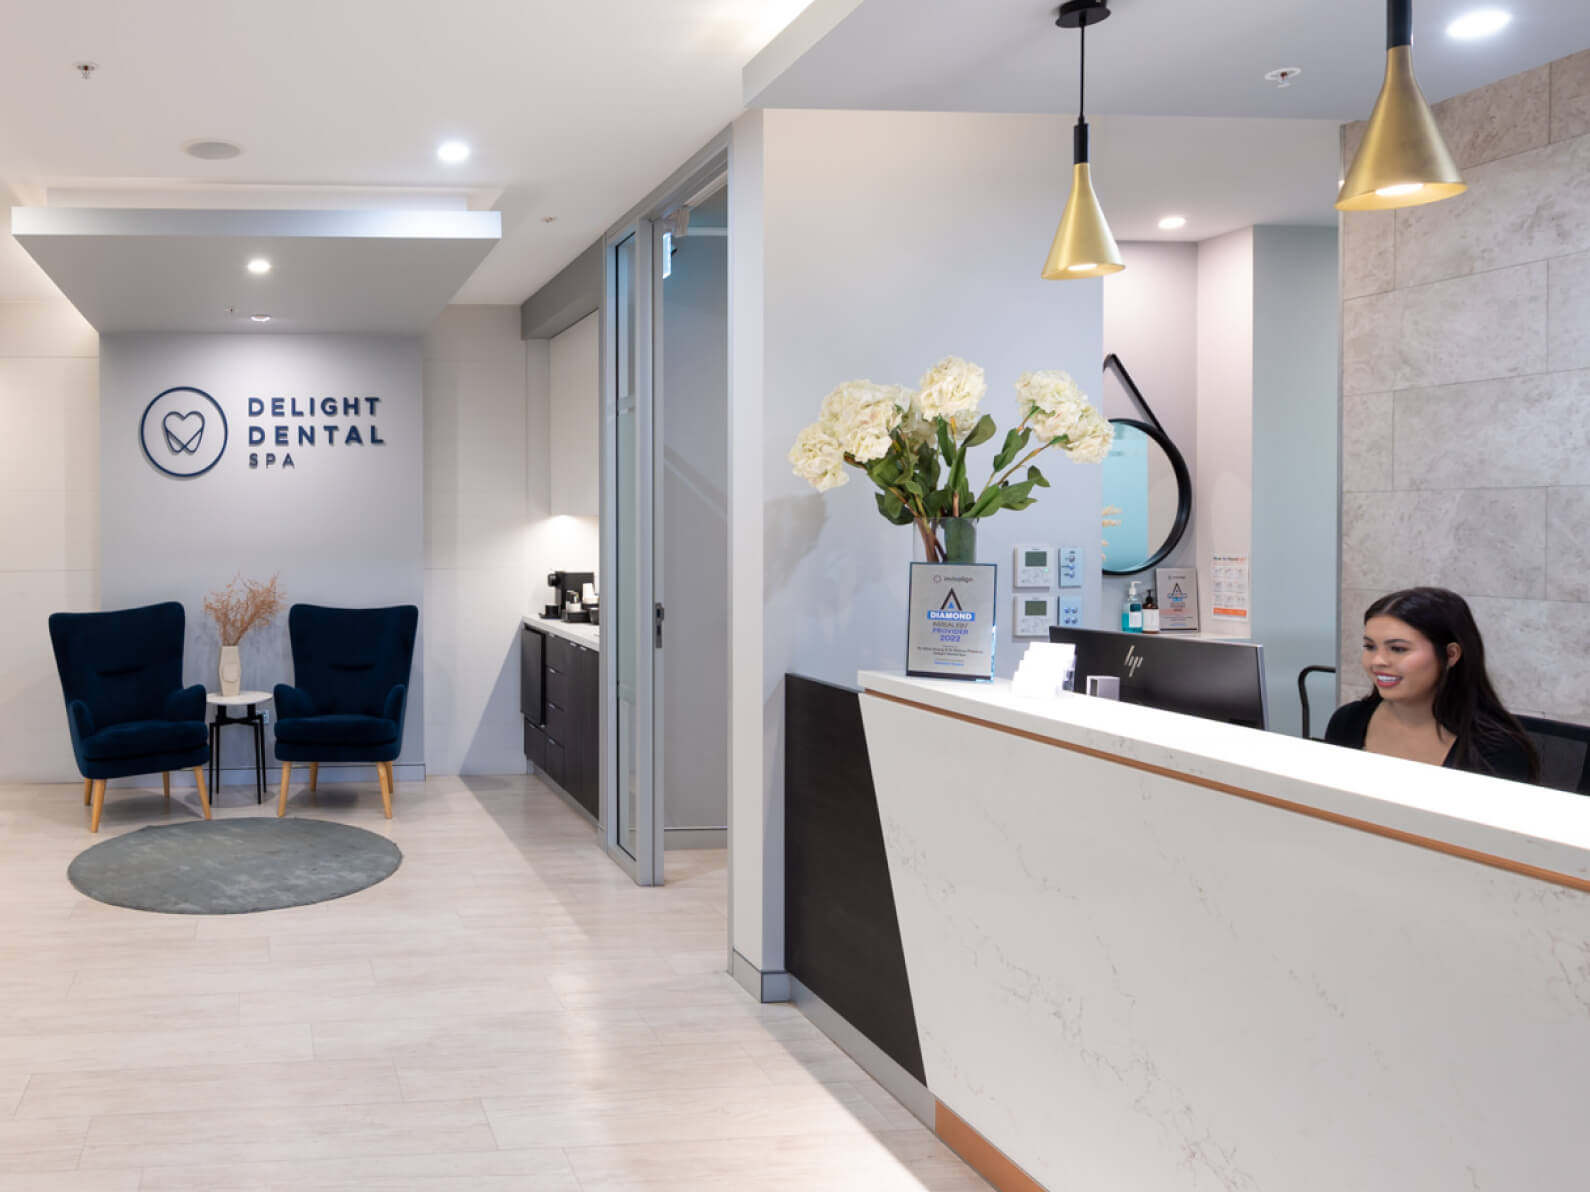 Taking The Next Step In Mascot, Sydney At Delight Dental Spa